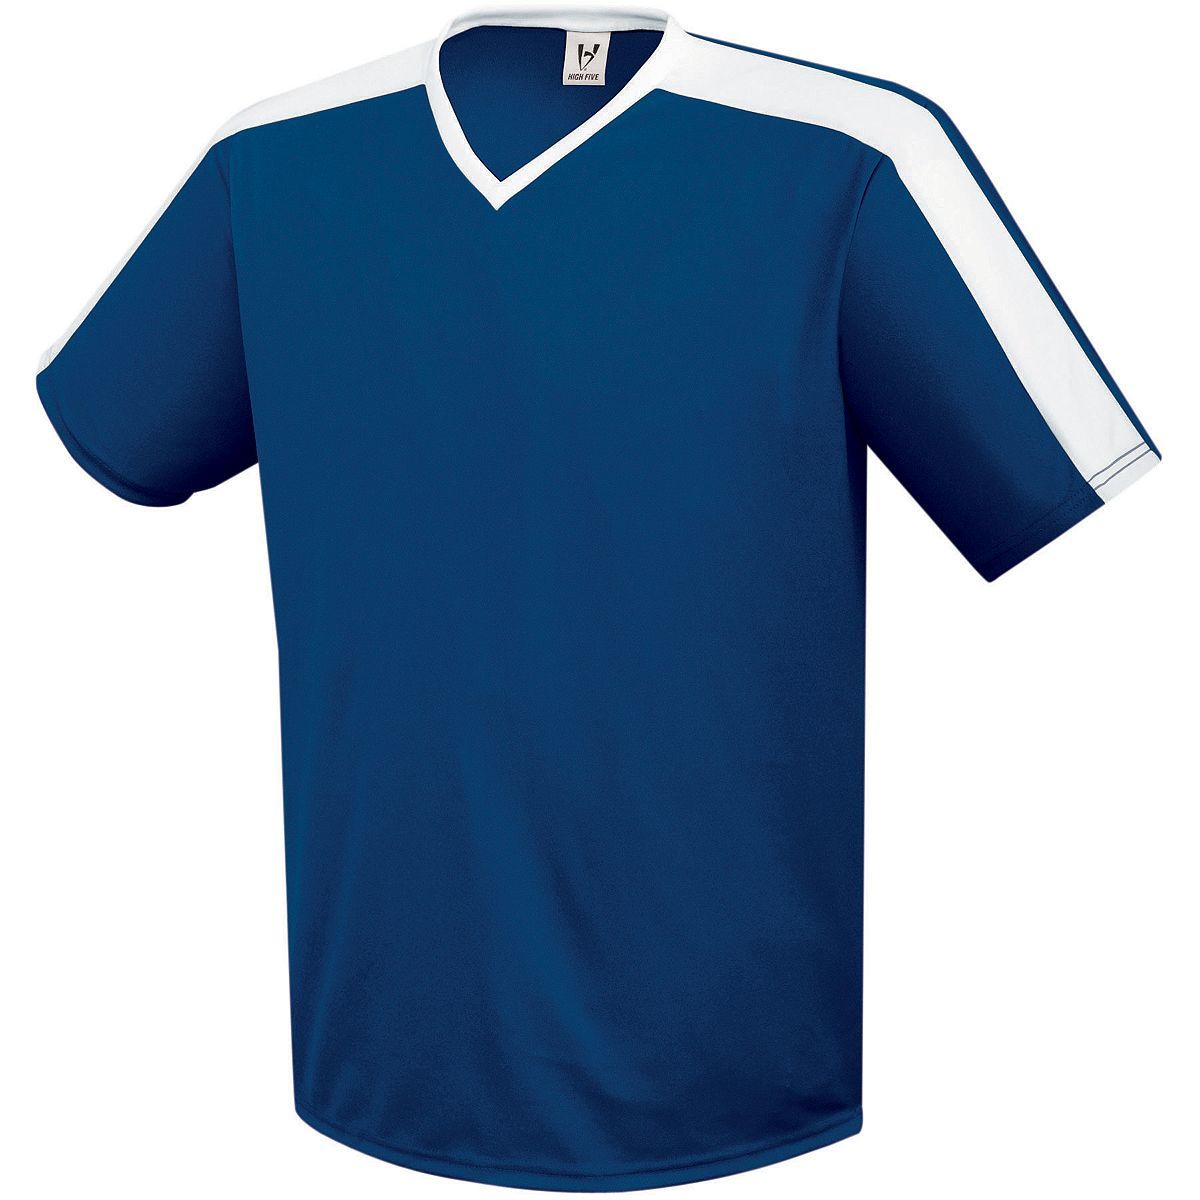 High 5 Youth Genesis Soccer Jersey in Navy/White  -Part of the Youth, Youth-Jersey, High5-Products, Soccer, Shirts, All-Sports-1 product lines at KanaleyCreations.com